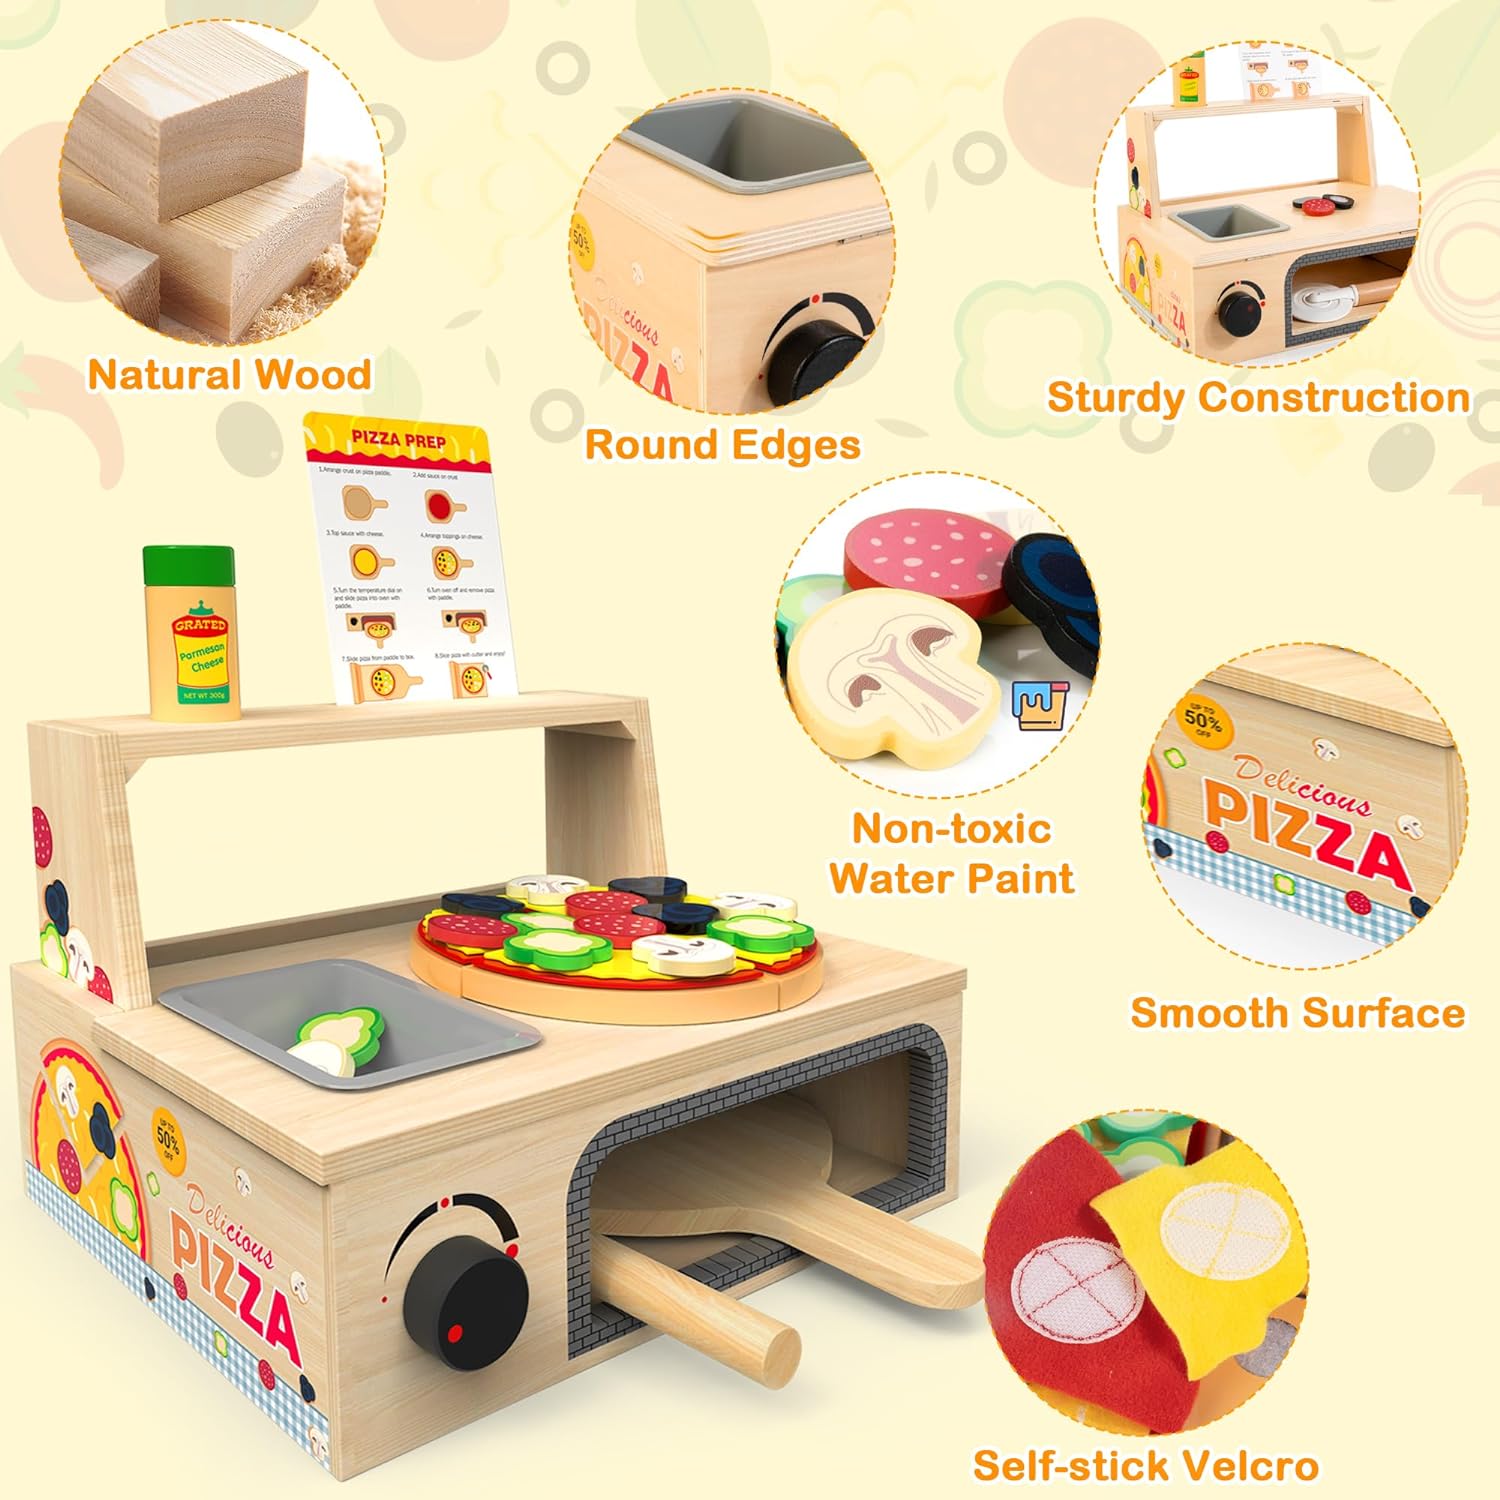 Wooden Pizza Toy - 48 PCS Montessori Pretend Play, Educational Learning Toy Wooden Playset with Bake Oven - Cykapu